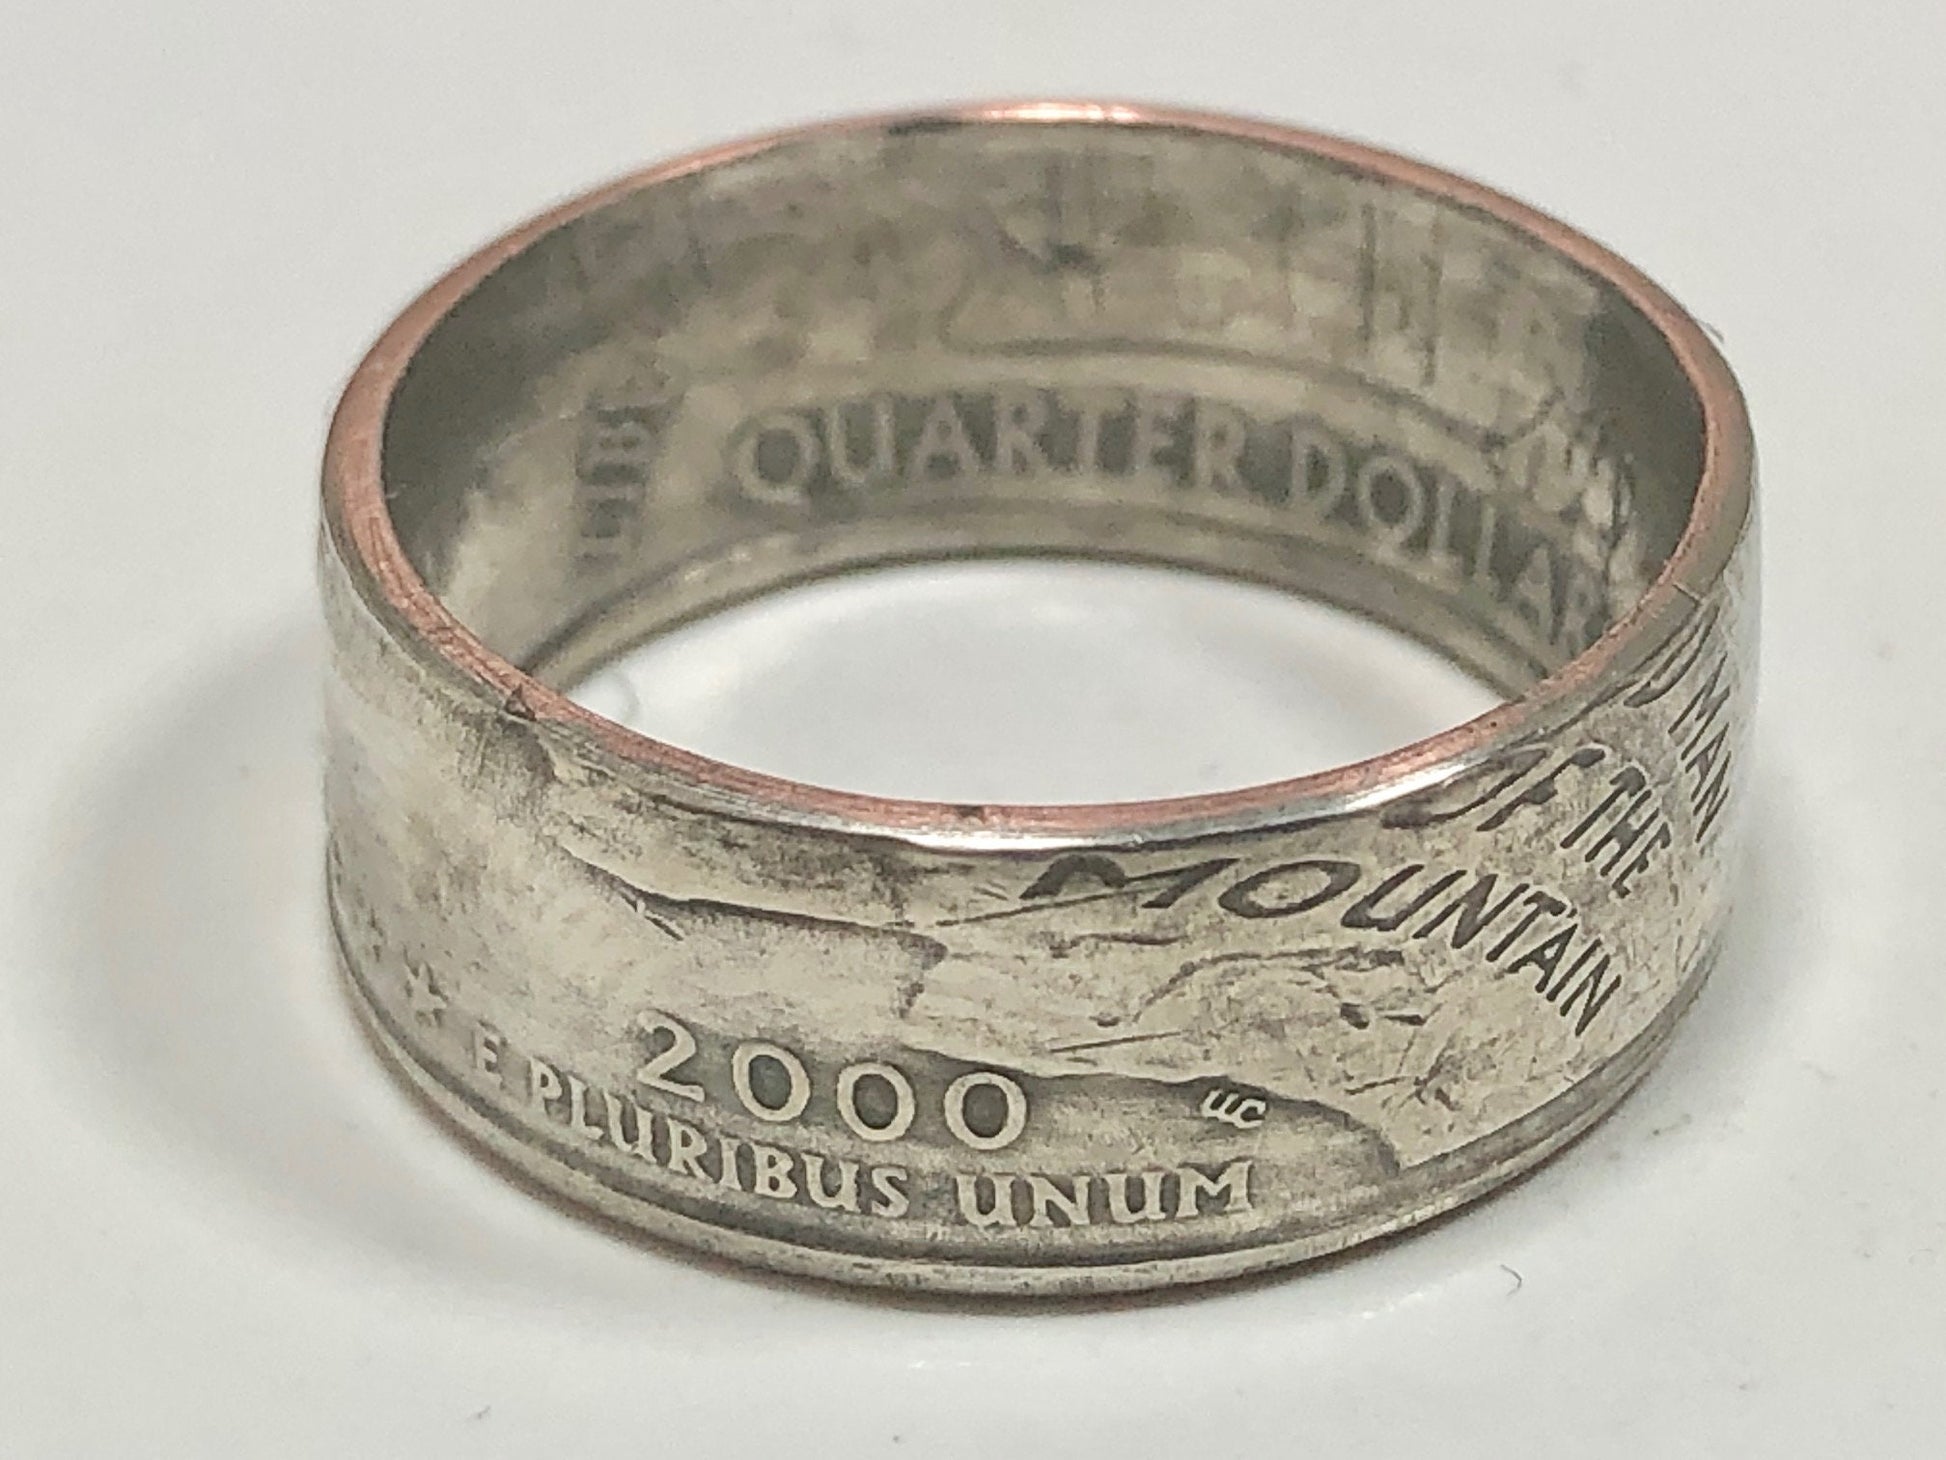 New Hampshire Ring State Quarter Coin Ring Hand Made